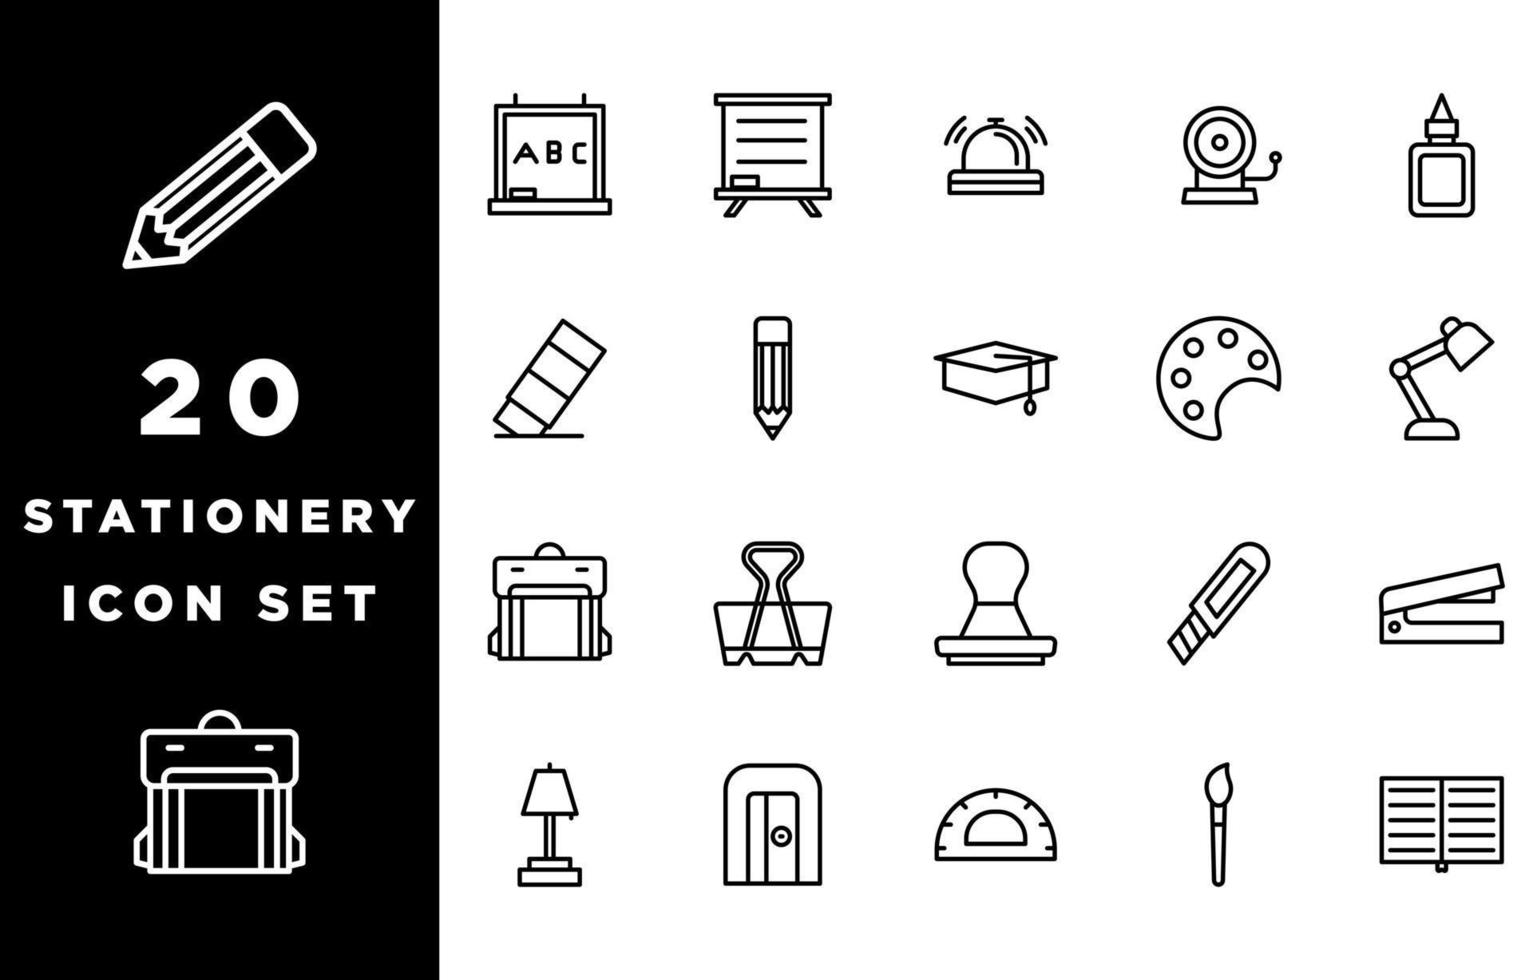 Stationery icon set element for your design vector